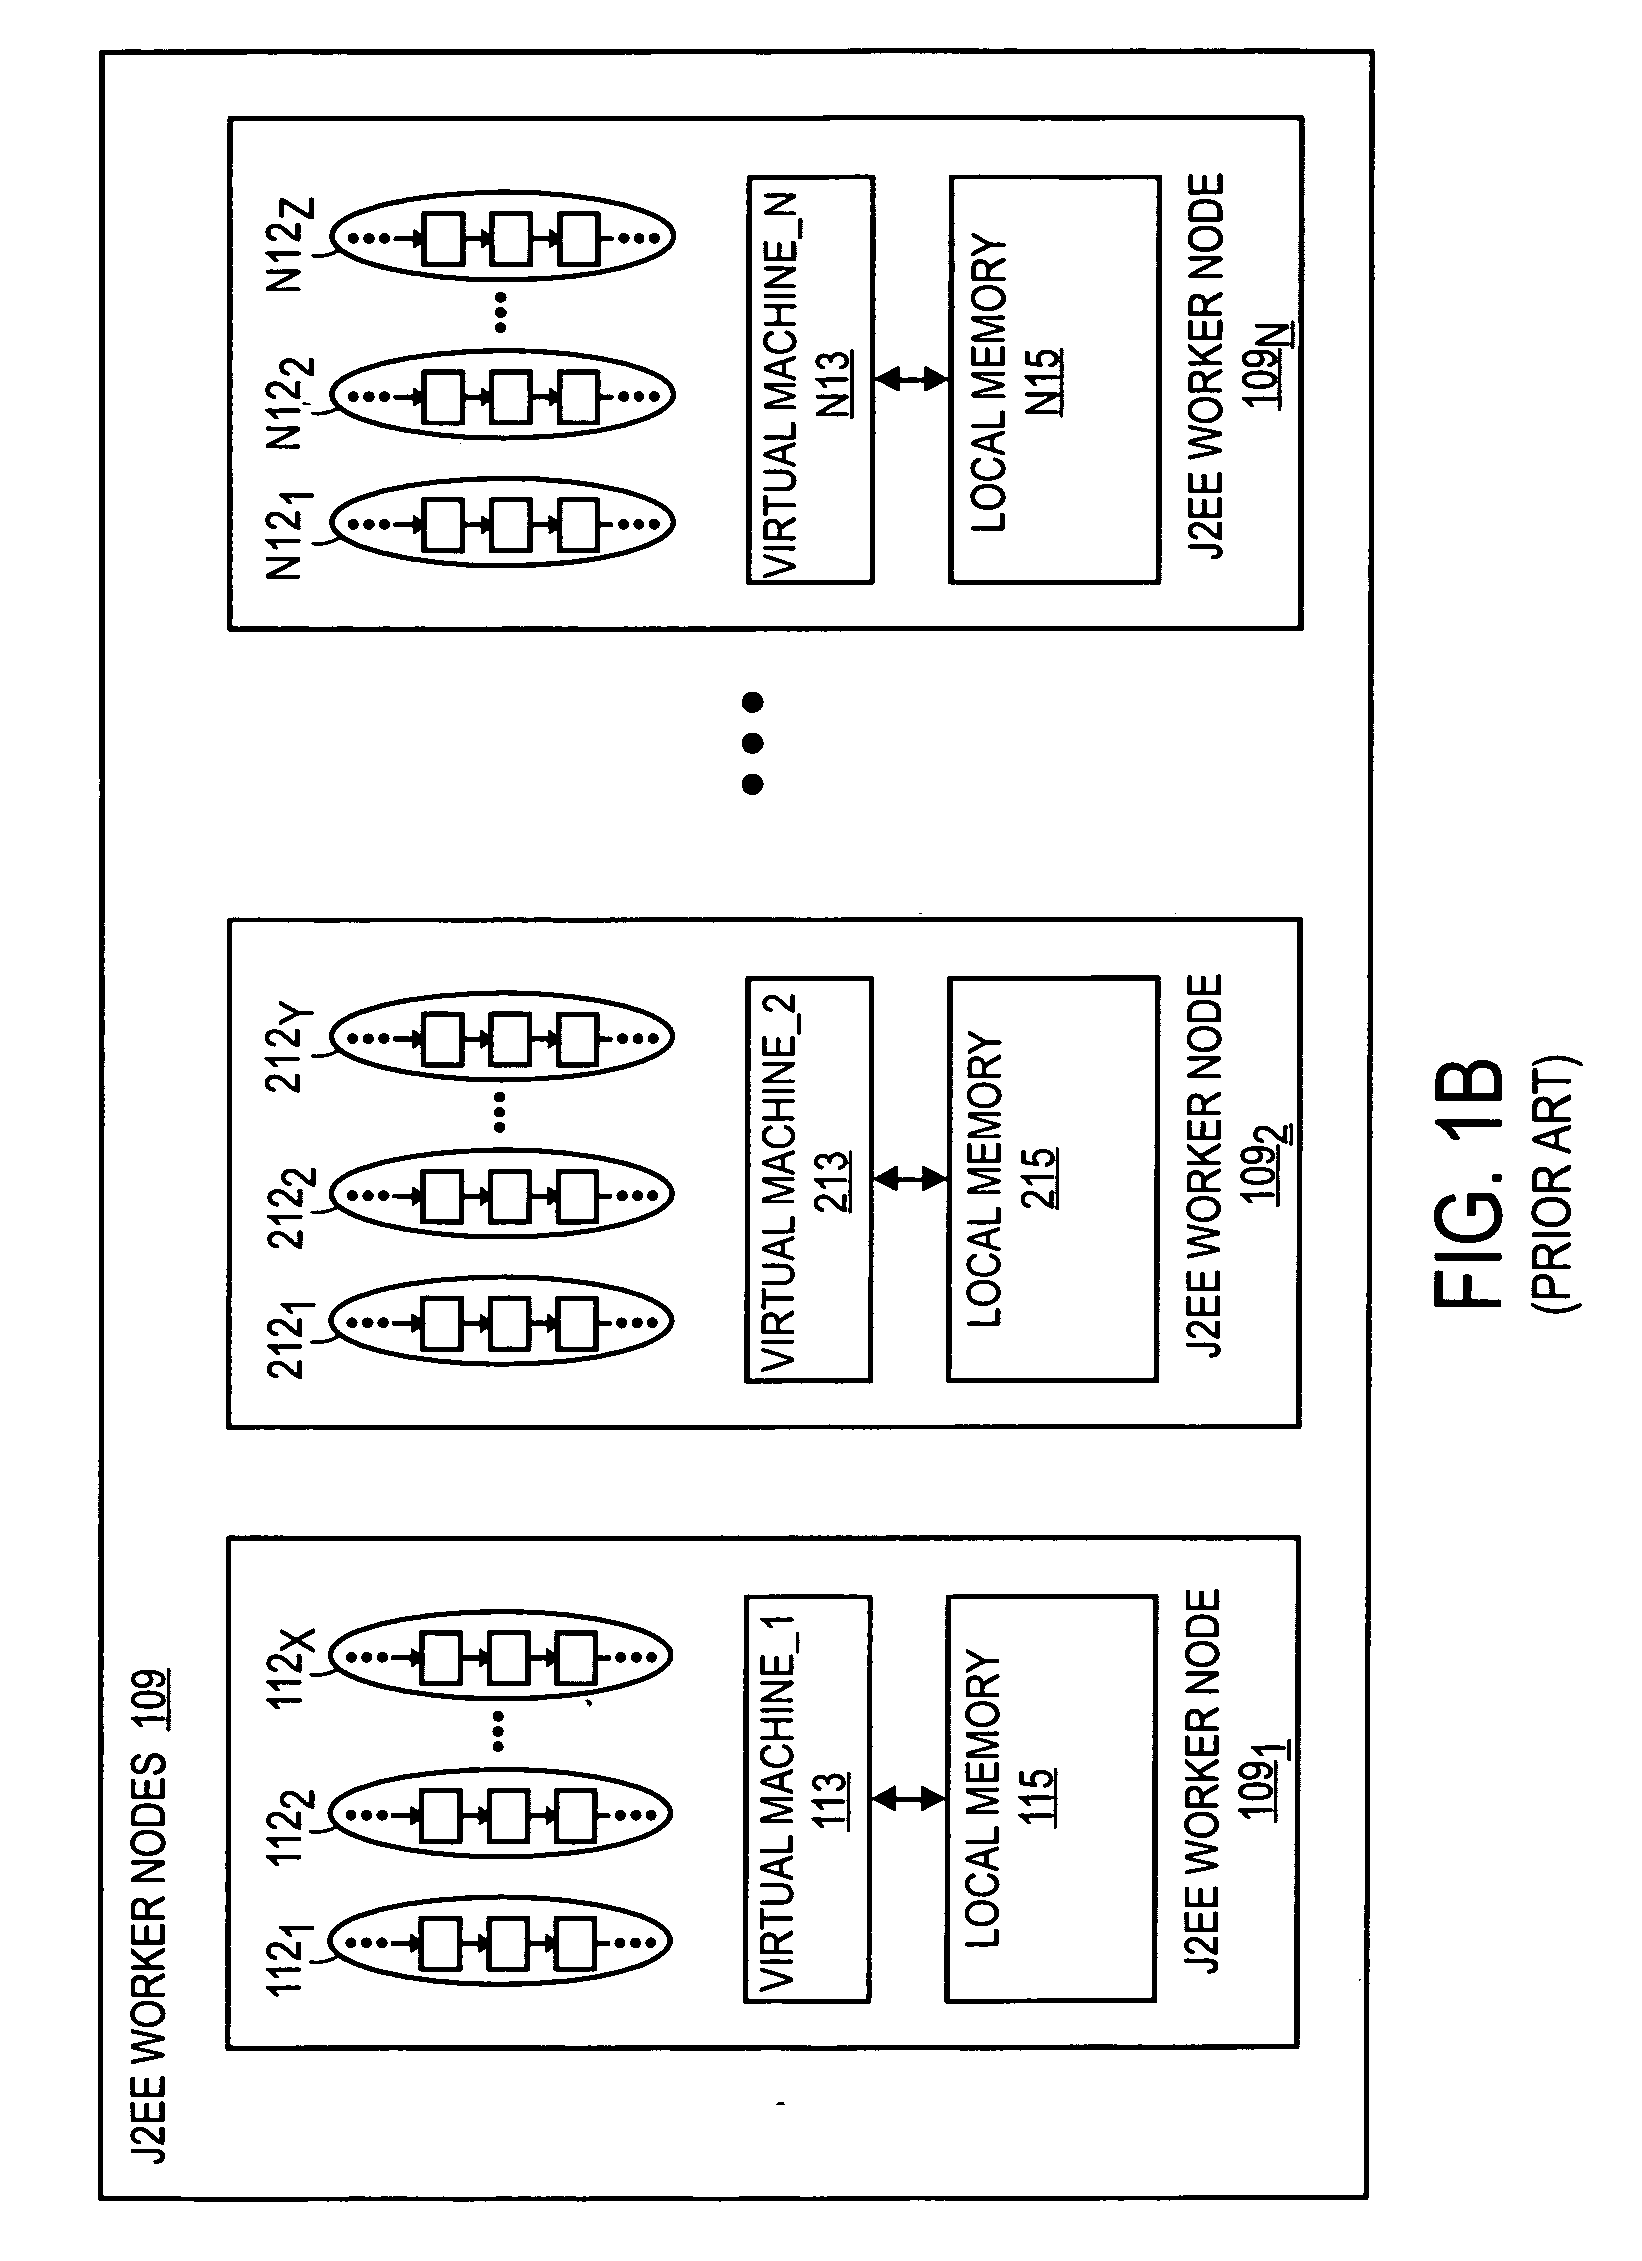 Connection manager capable of supporting both distributed computing sessions and non distributed computing sessions